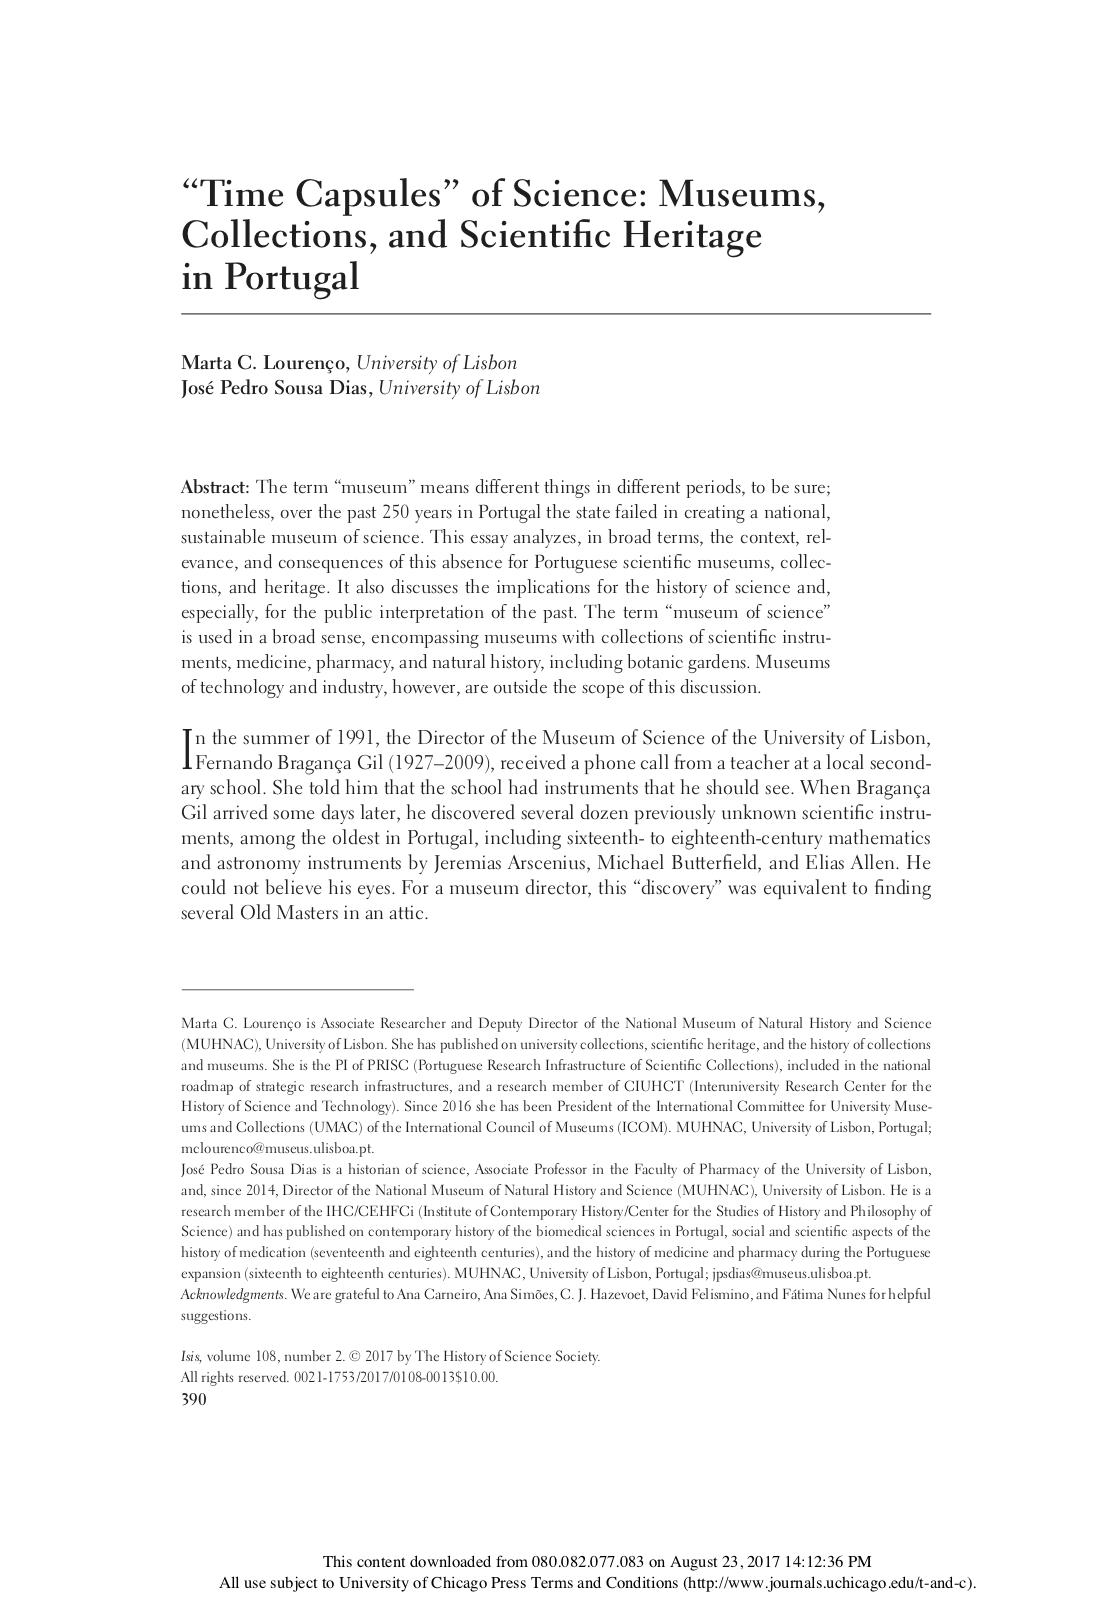 The ‘time capsules’ of science: Museums, collections and scientific heritage in Portugal, Capa